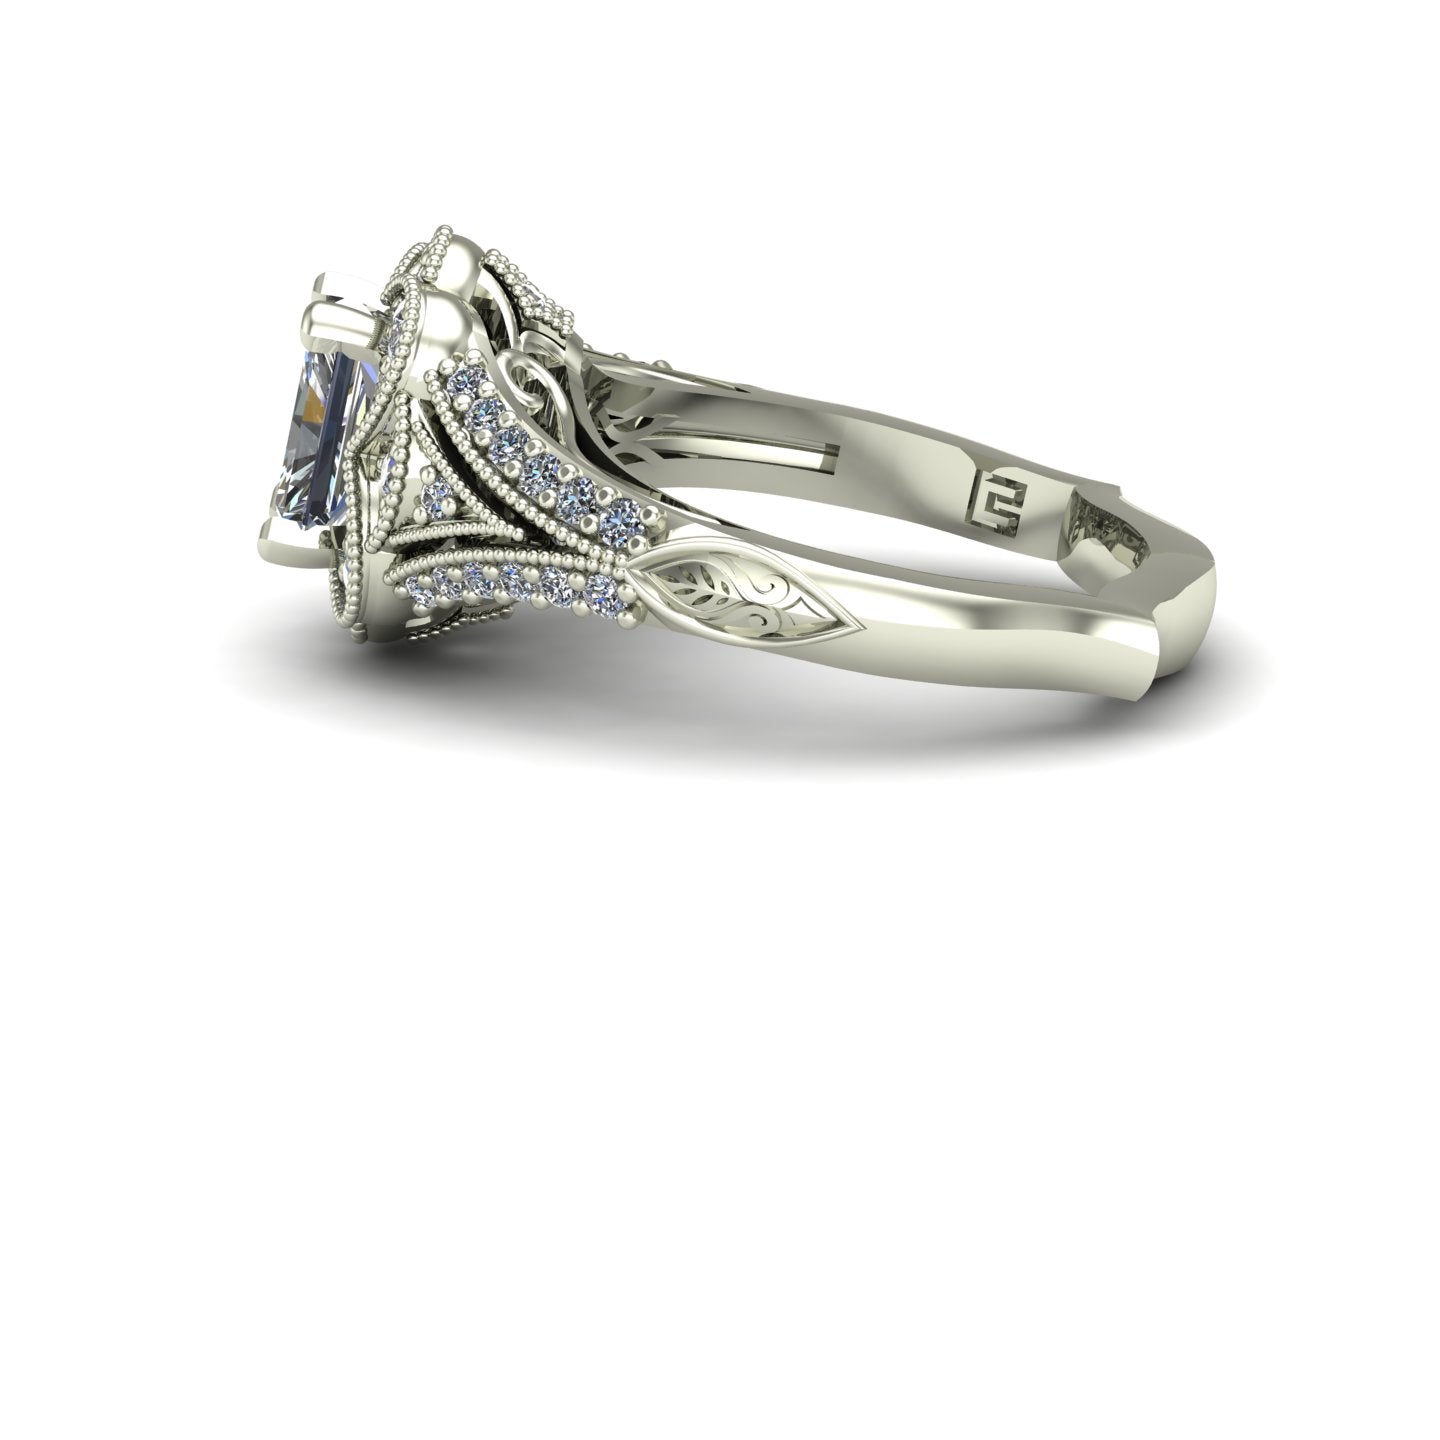 one carat radiant cut diamond scallop halo engagement ring in 14k white gold - Charles Babb Designs - side view